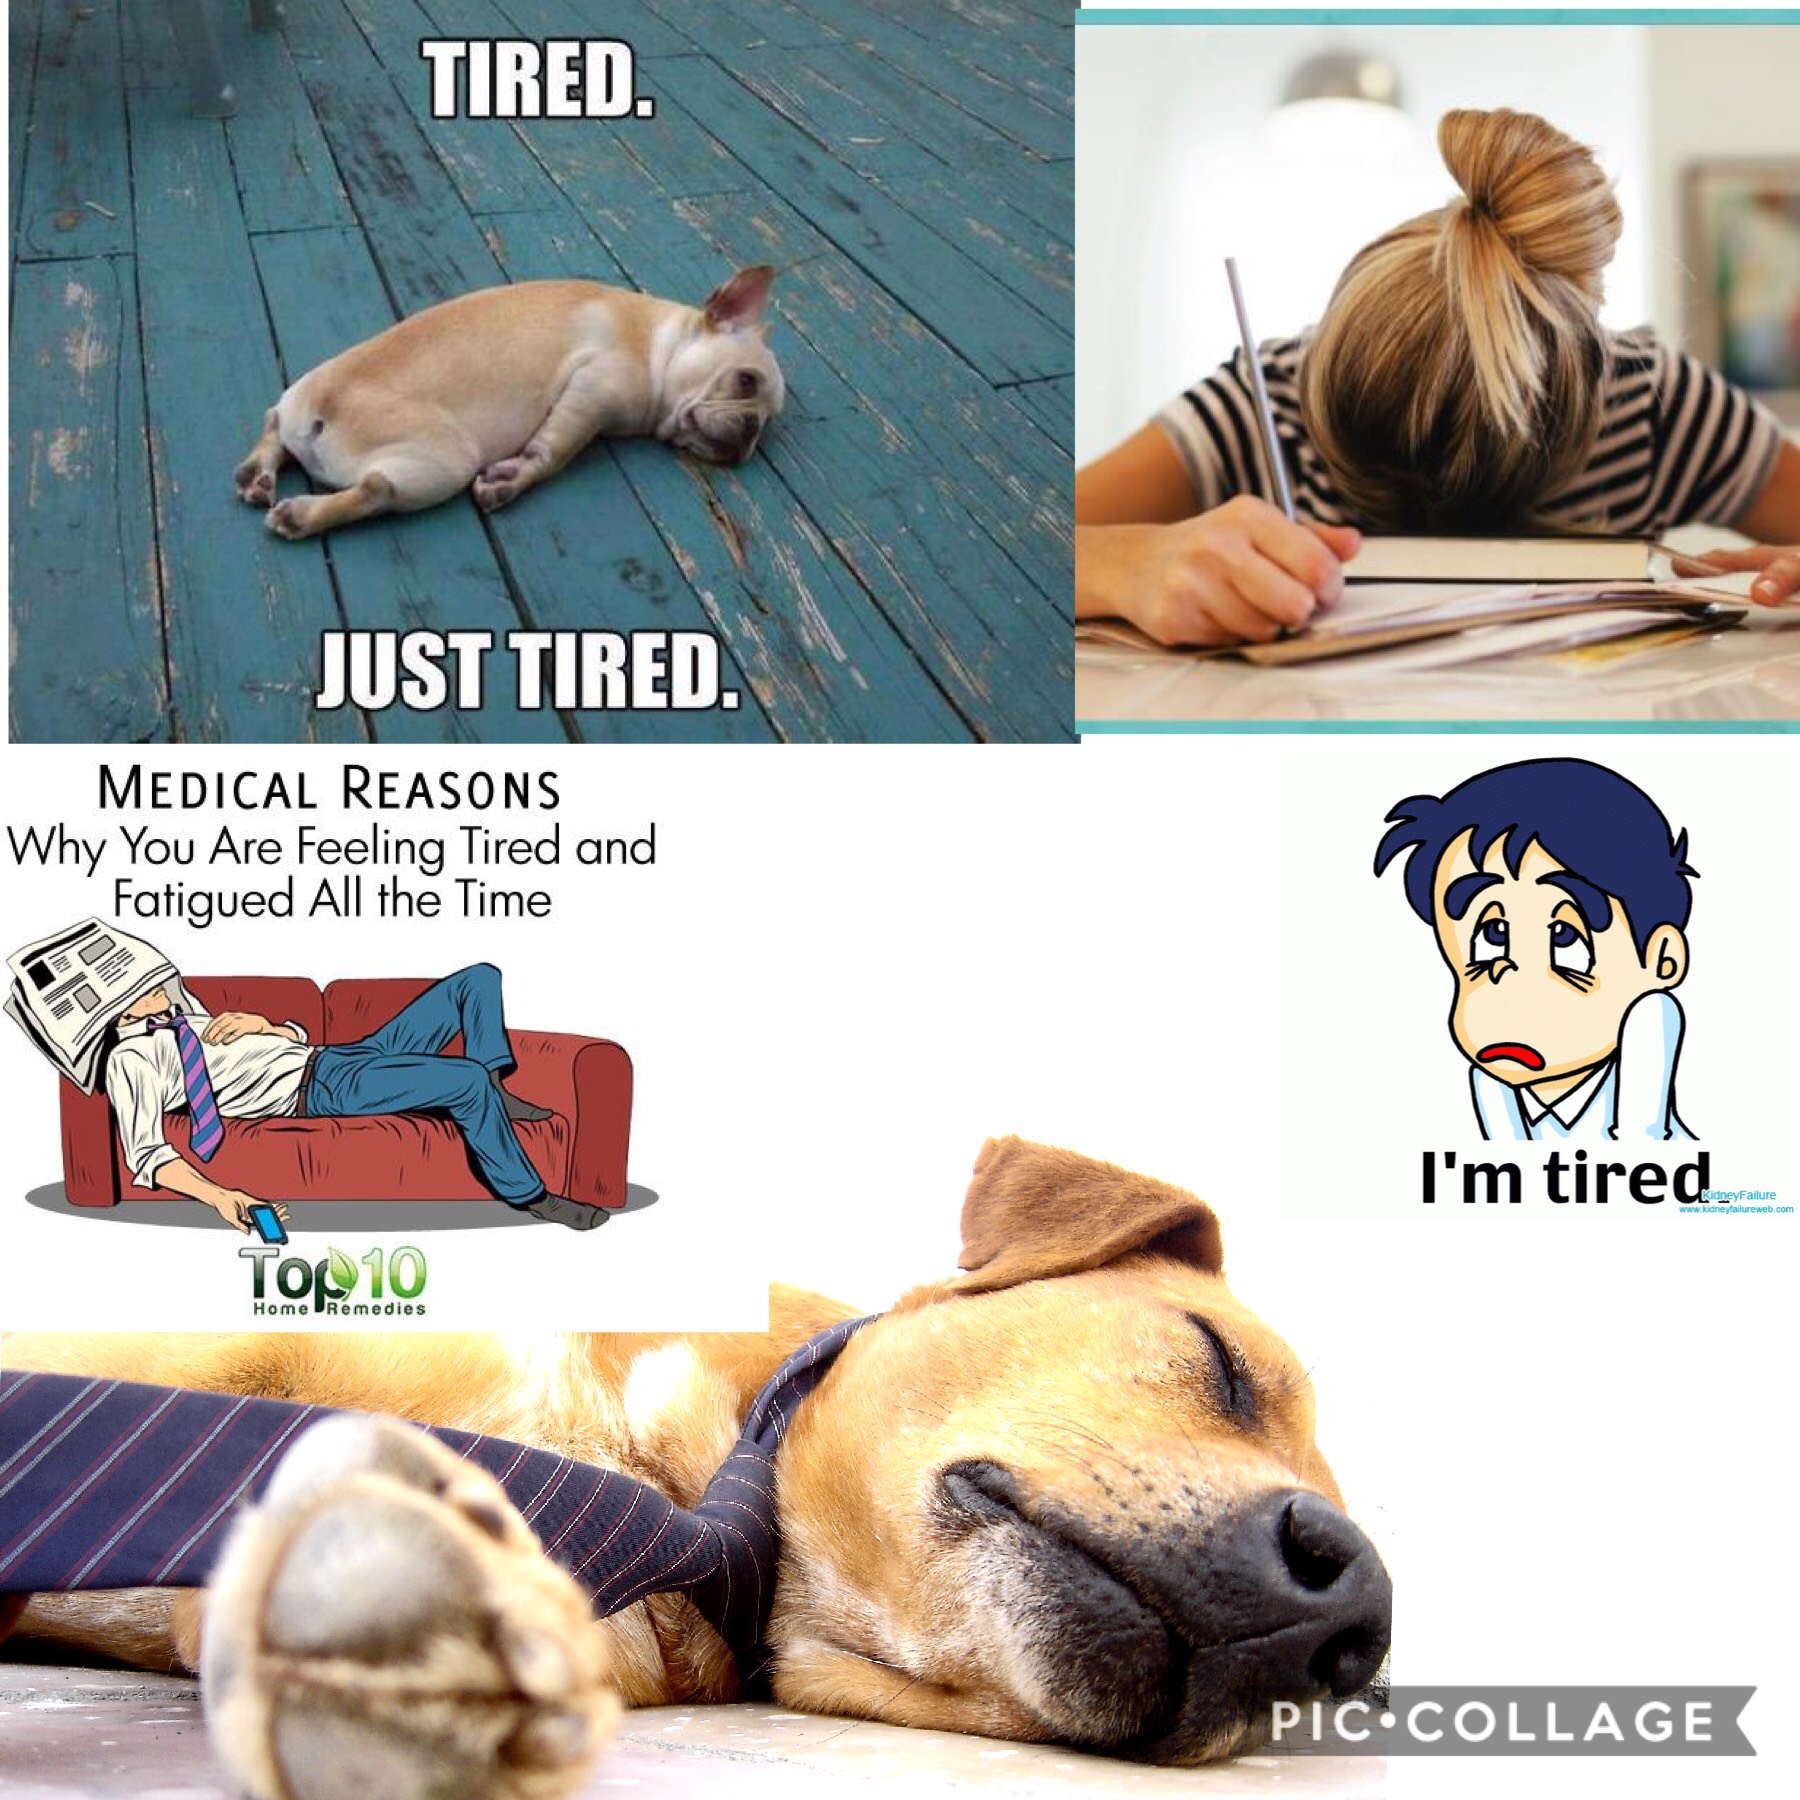 So tired 